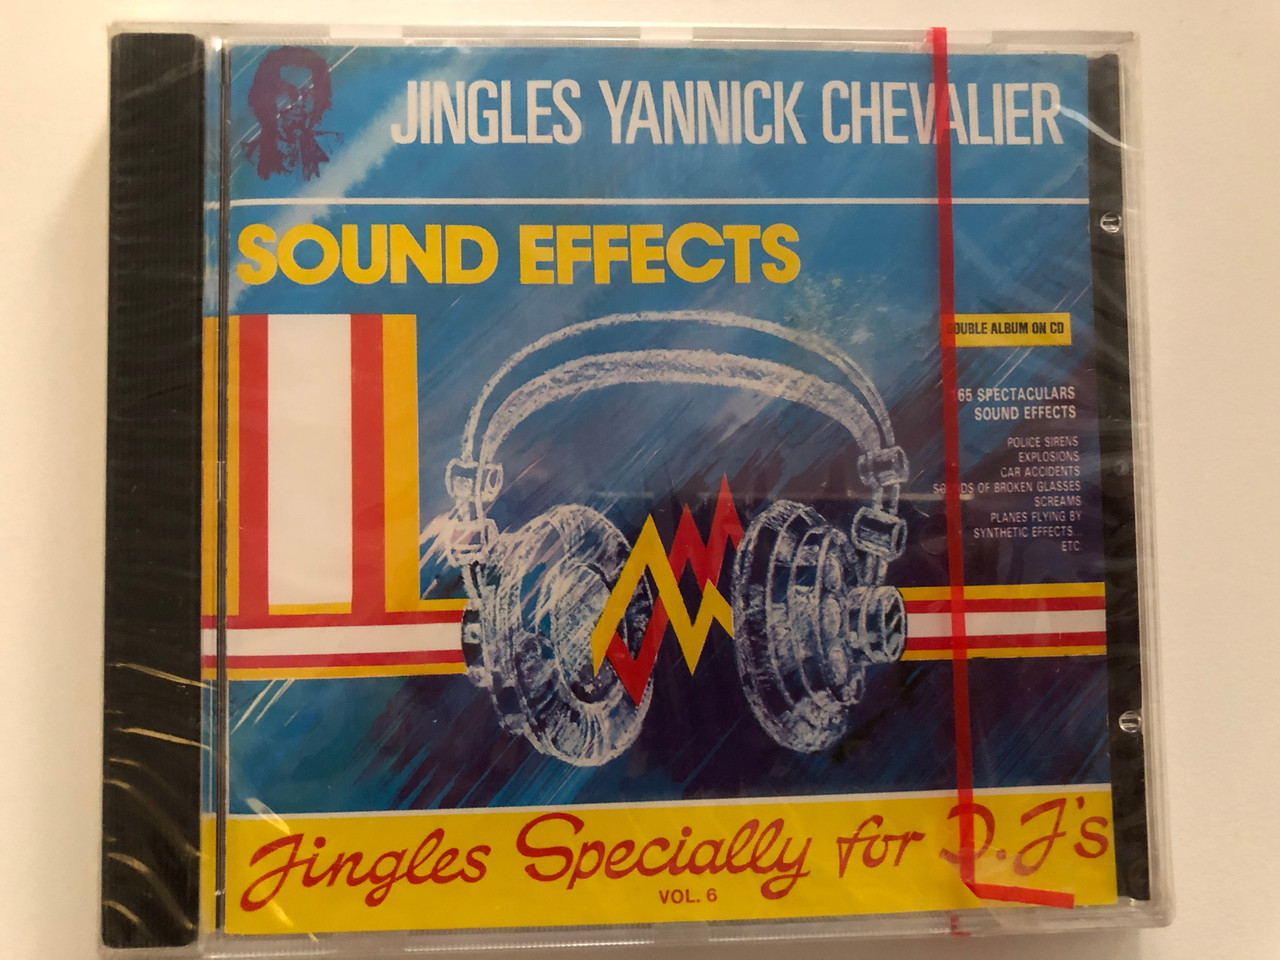 https://cdn10.bigcommerce.com/s-62bdpkt7pb/products/31089/images/183126/Jingles_Yannick_Chevalier_-_Sound_Effects_-_Jingles_Specially_For_D.J.s_Vol._6_Double_Album_On_CD_165_Spectaculars_Sound_Effects_Police_Sirens_Explosions_Car_Accidents_Sounds_Of_Broken_1__28773.1625124240.1280.1280.JPG?c=2